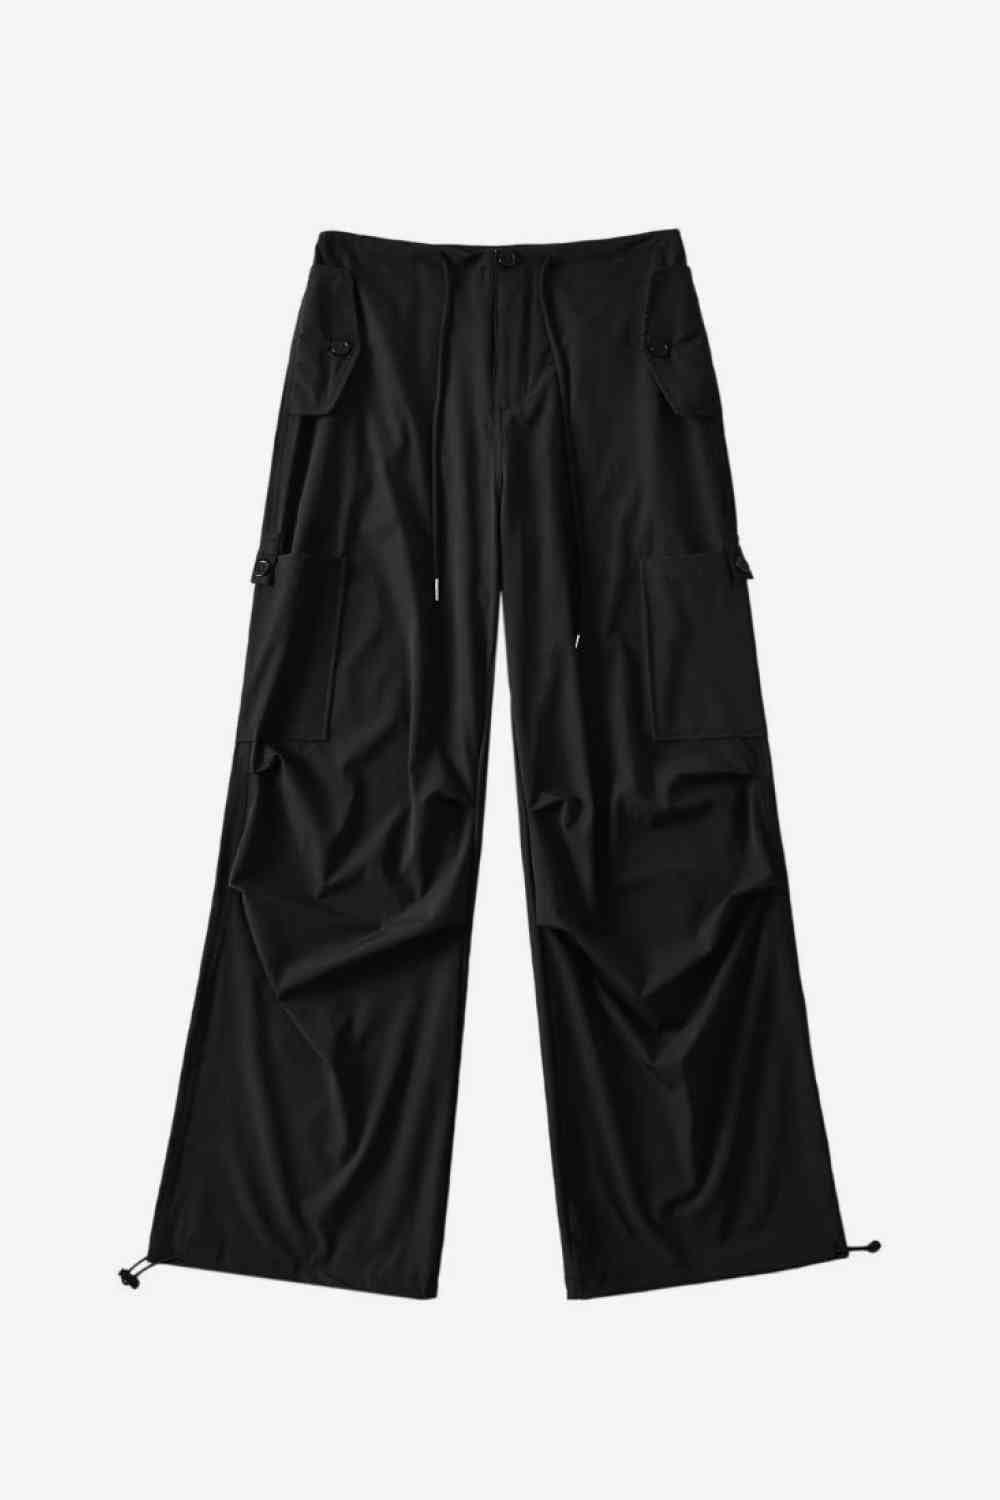 Drawstring Waist Joggers with Pockets - CLASSY CLOSET BOUTIQUE